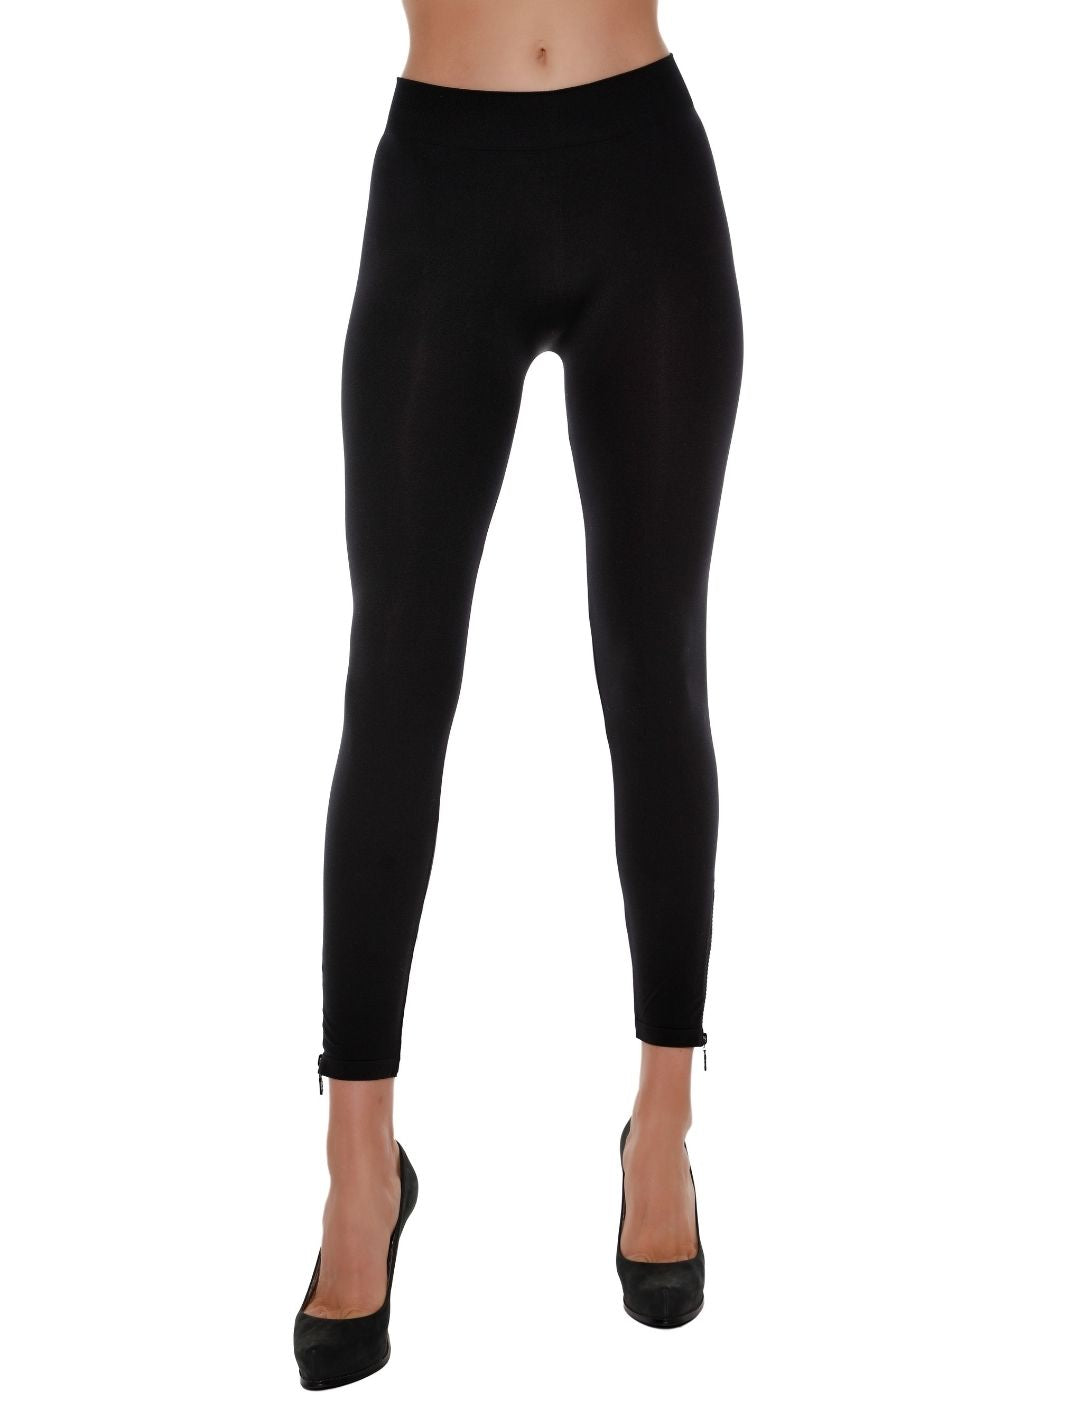 Women's Seamless Leggings with Rhinestone Zipper at the Ankle